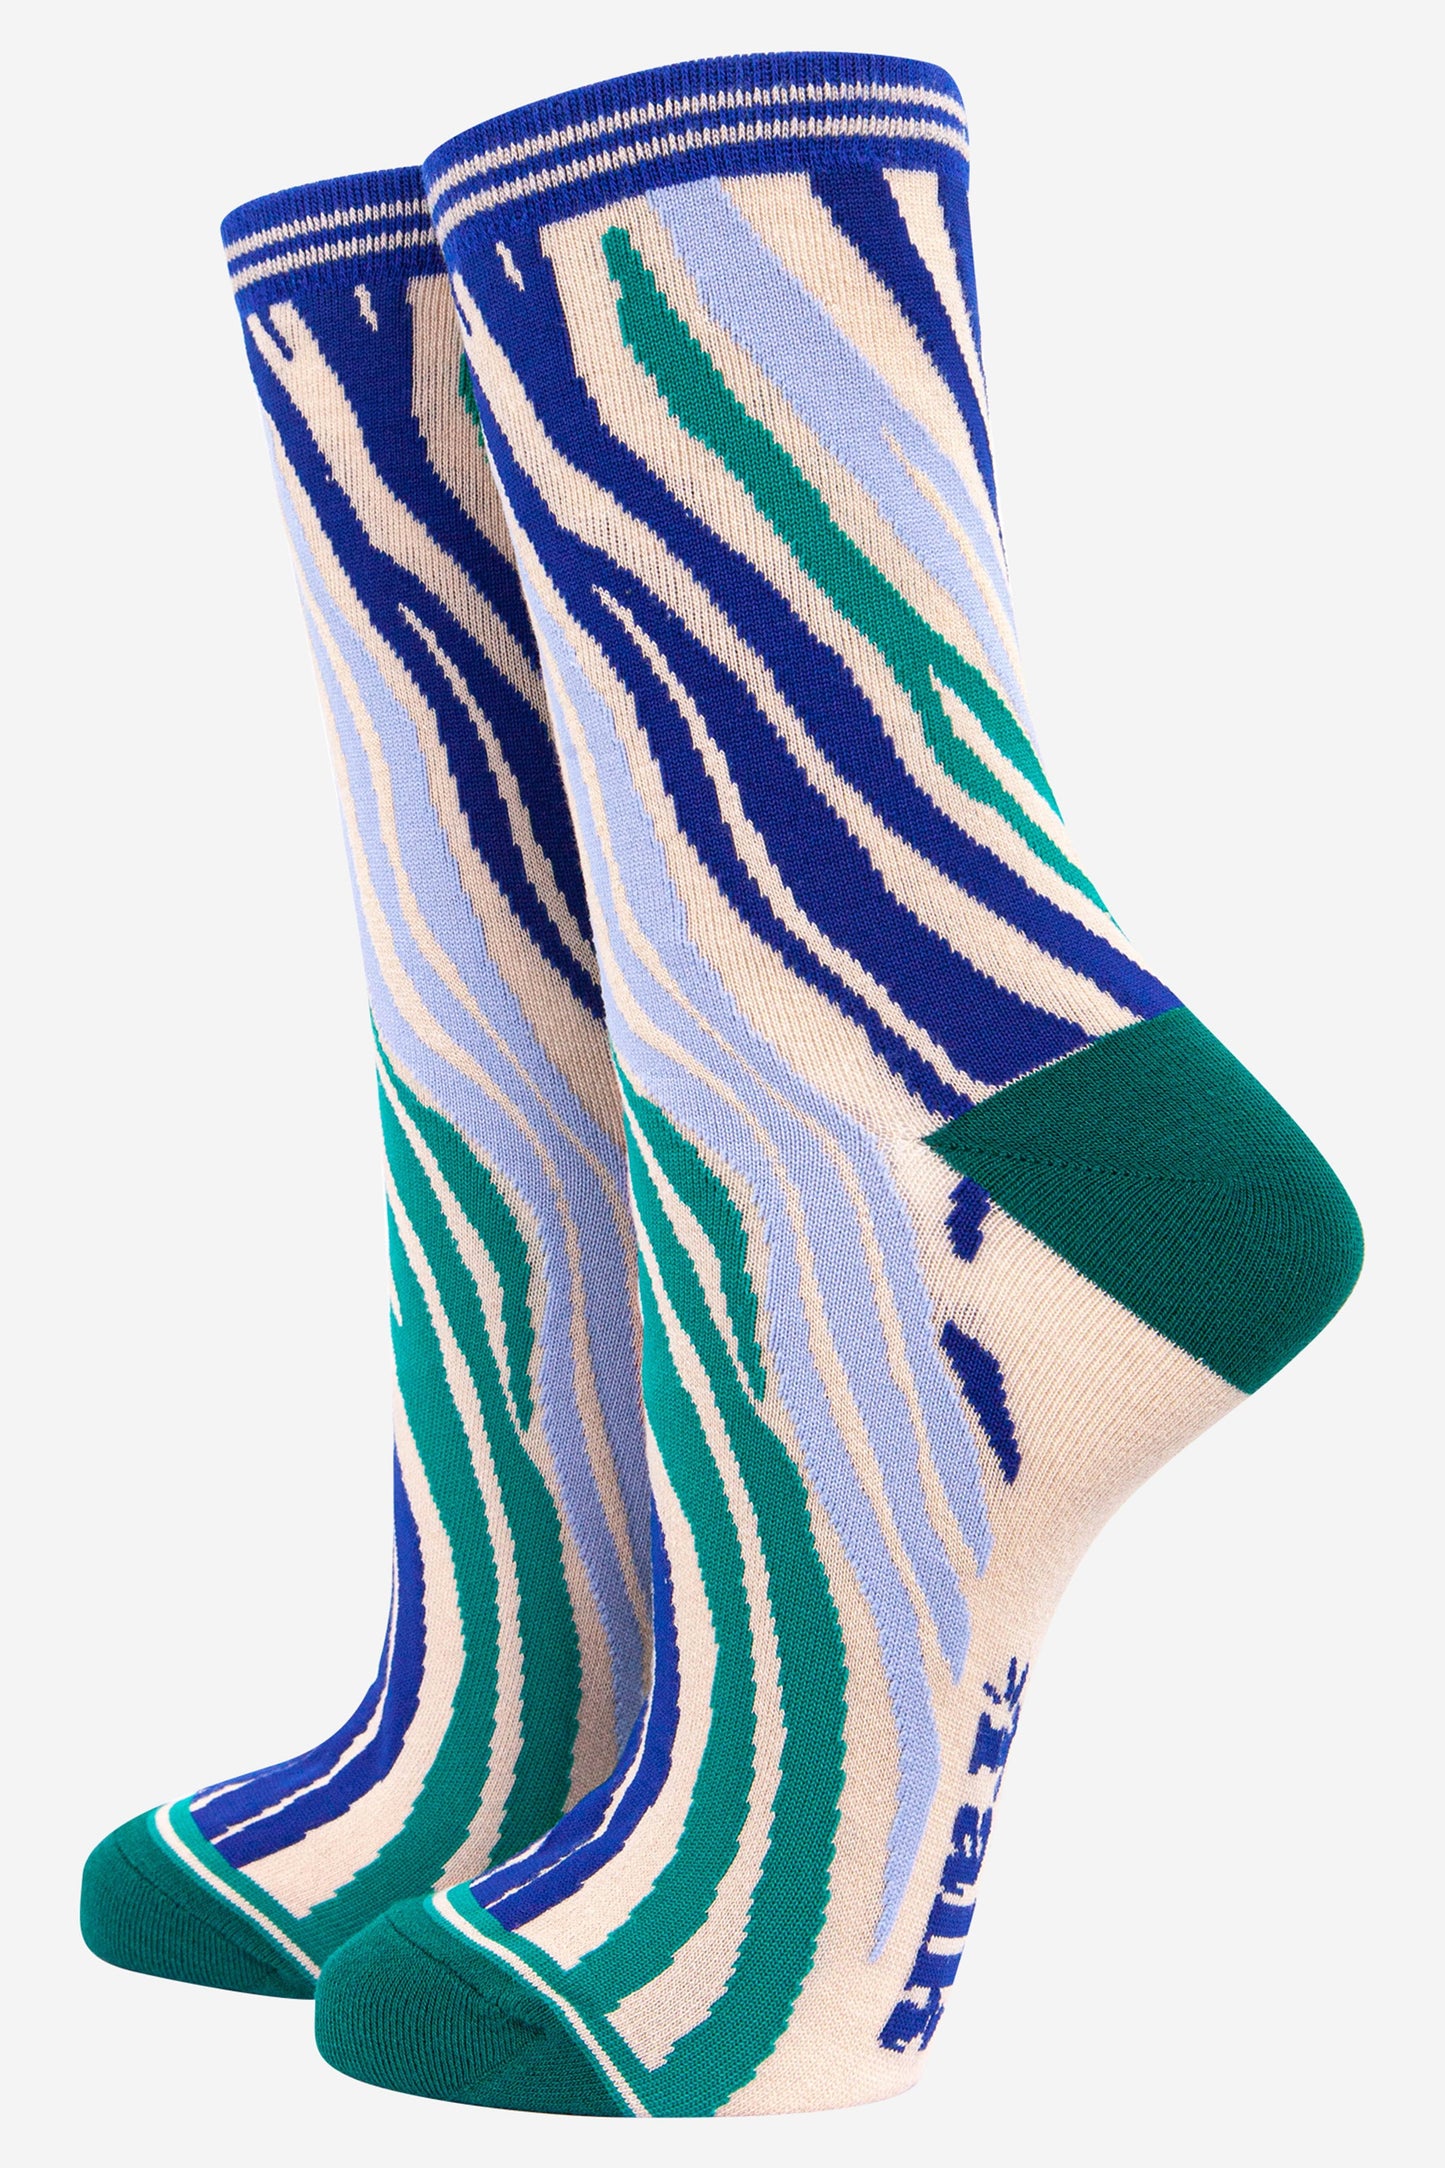 bamboo ankle socks with an all over green and blue zebra print pattern